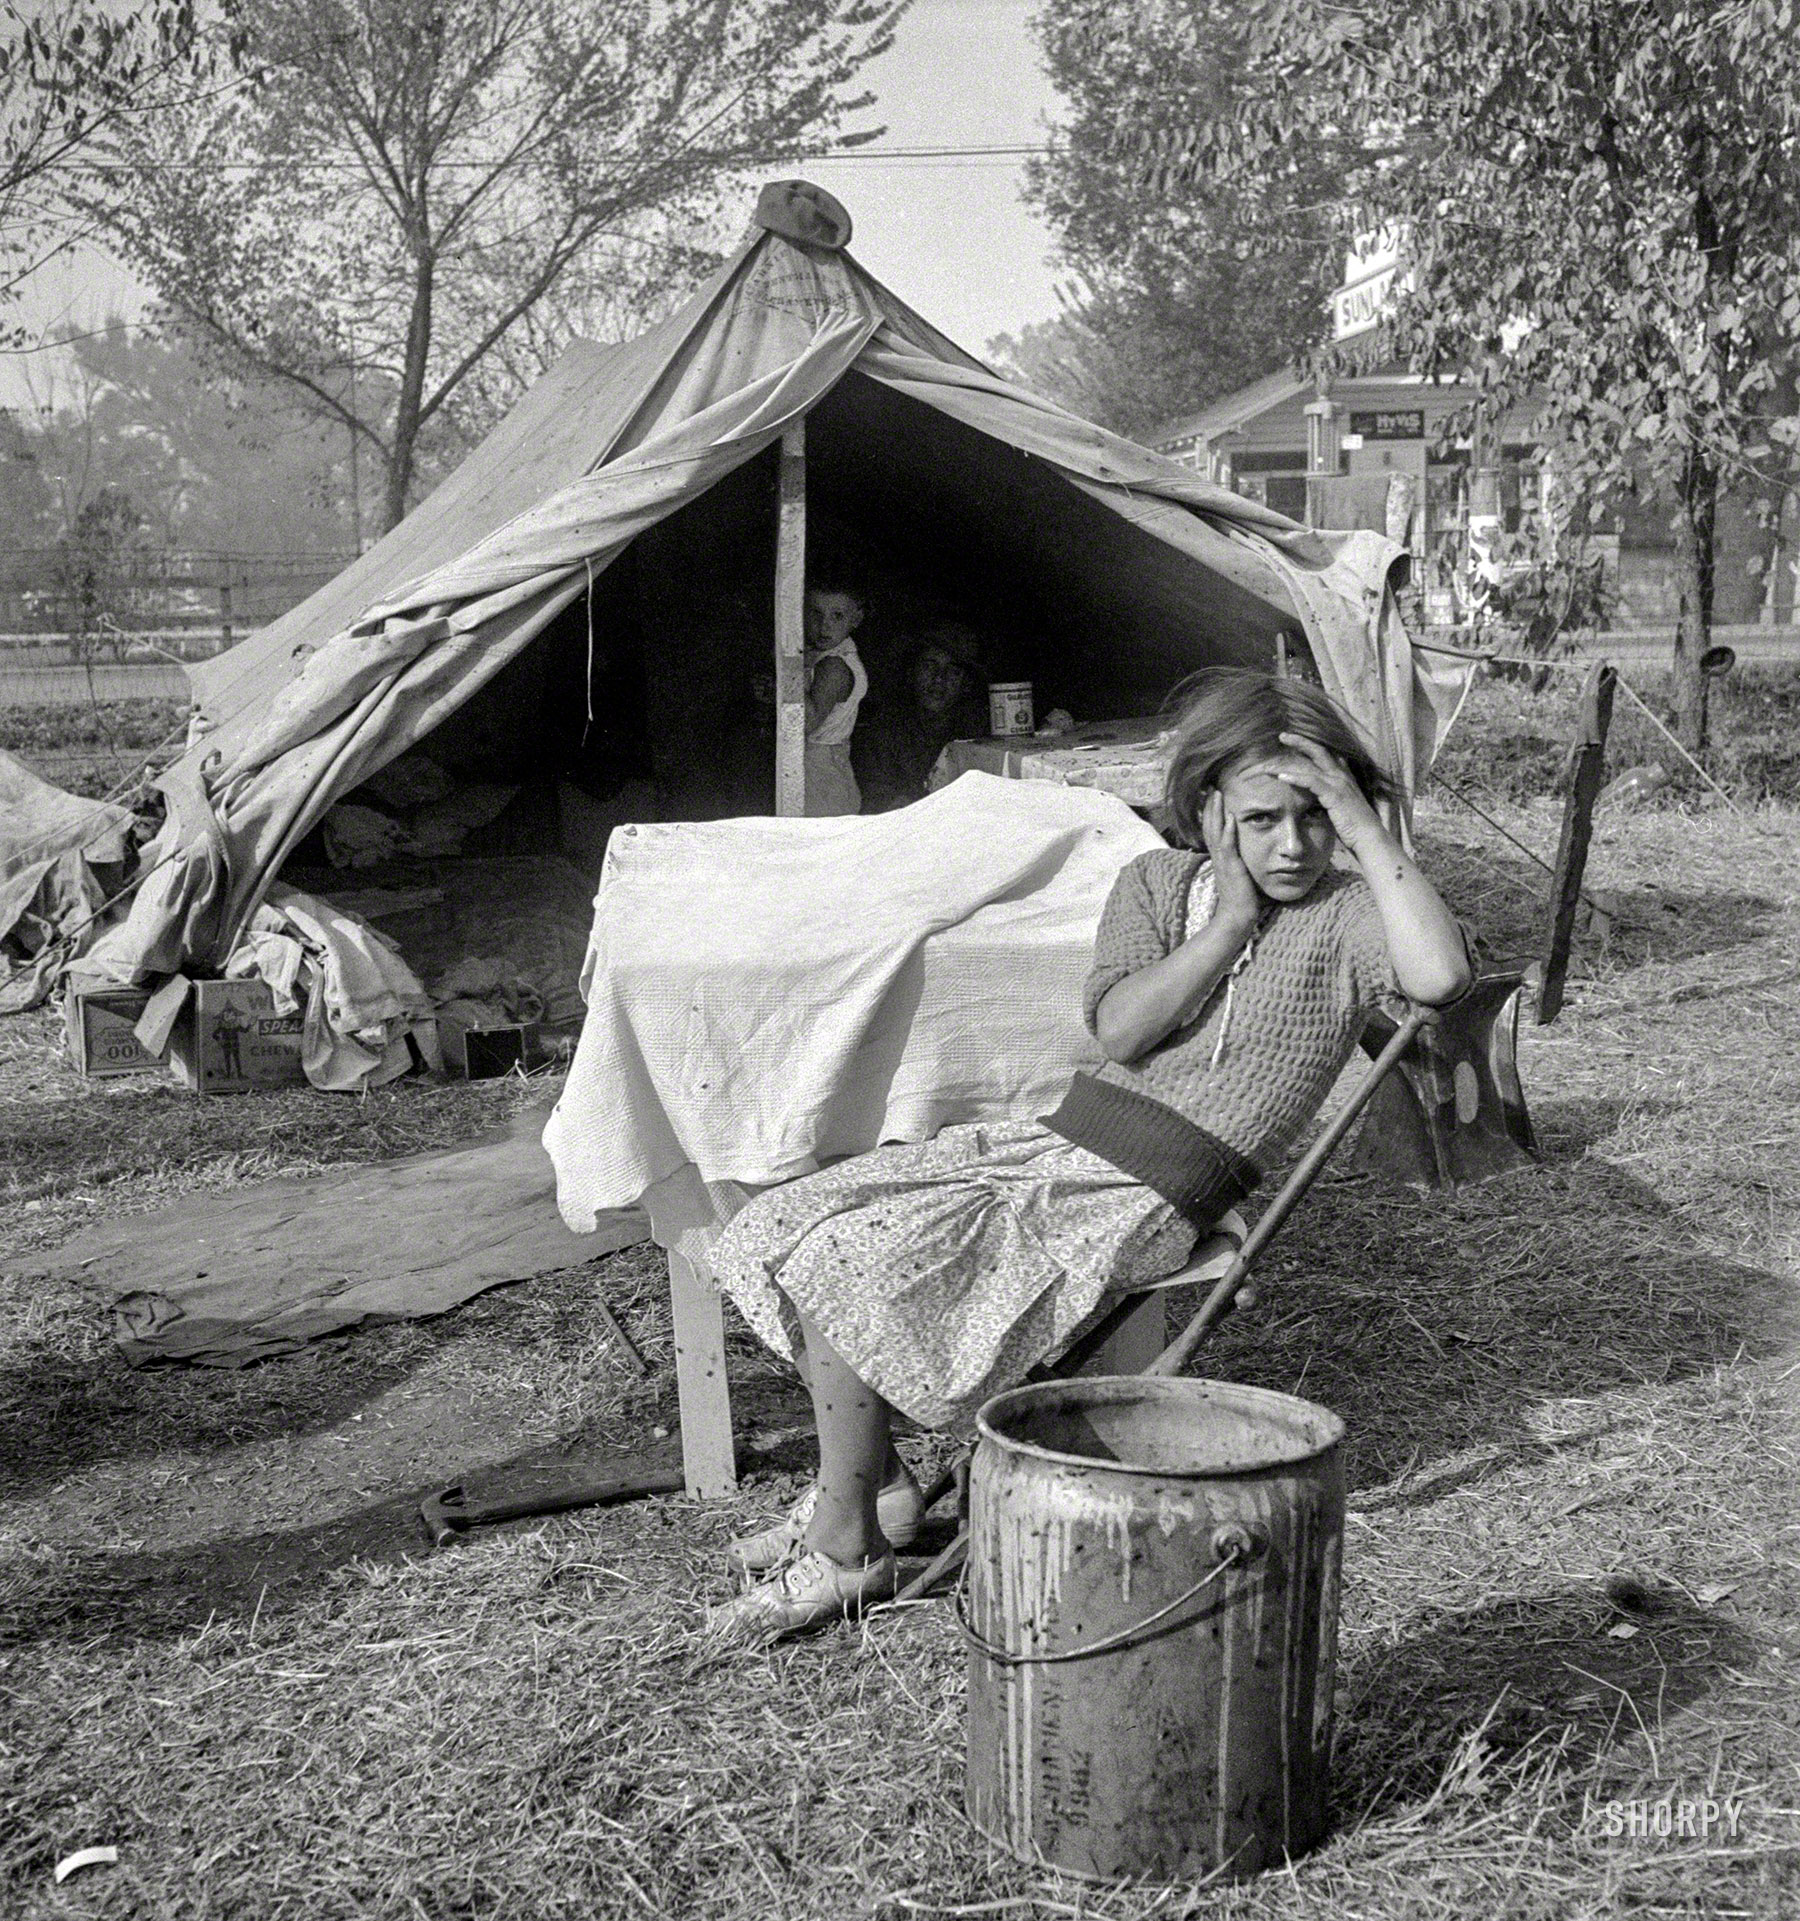 November 1936. "Children and home of cotton workers at migratory camp in southern San Joaquin Valley, California." Medium format negative by Dorothea Lange for the Farm Security Administration. View full size.